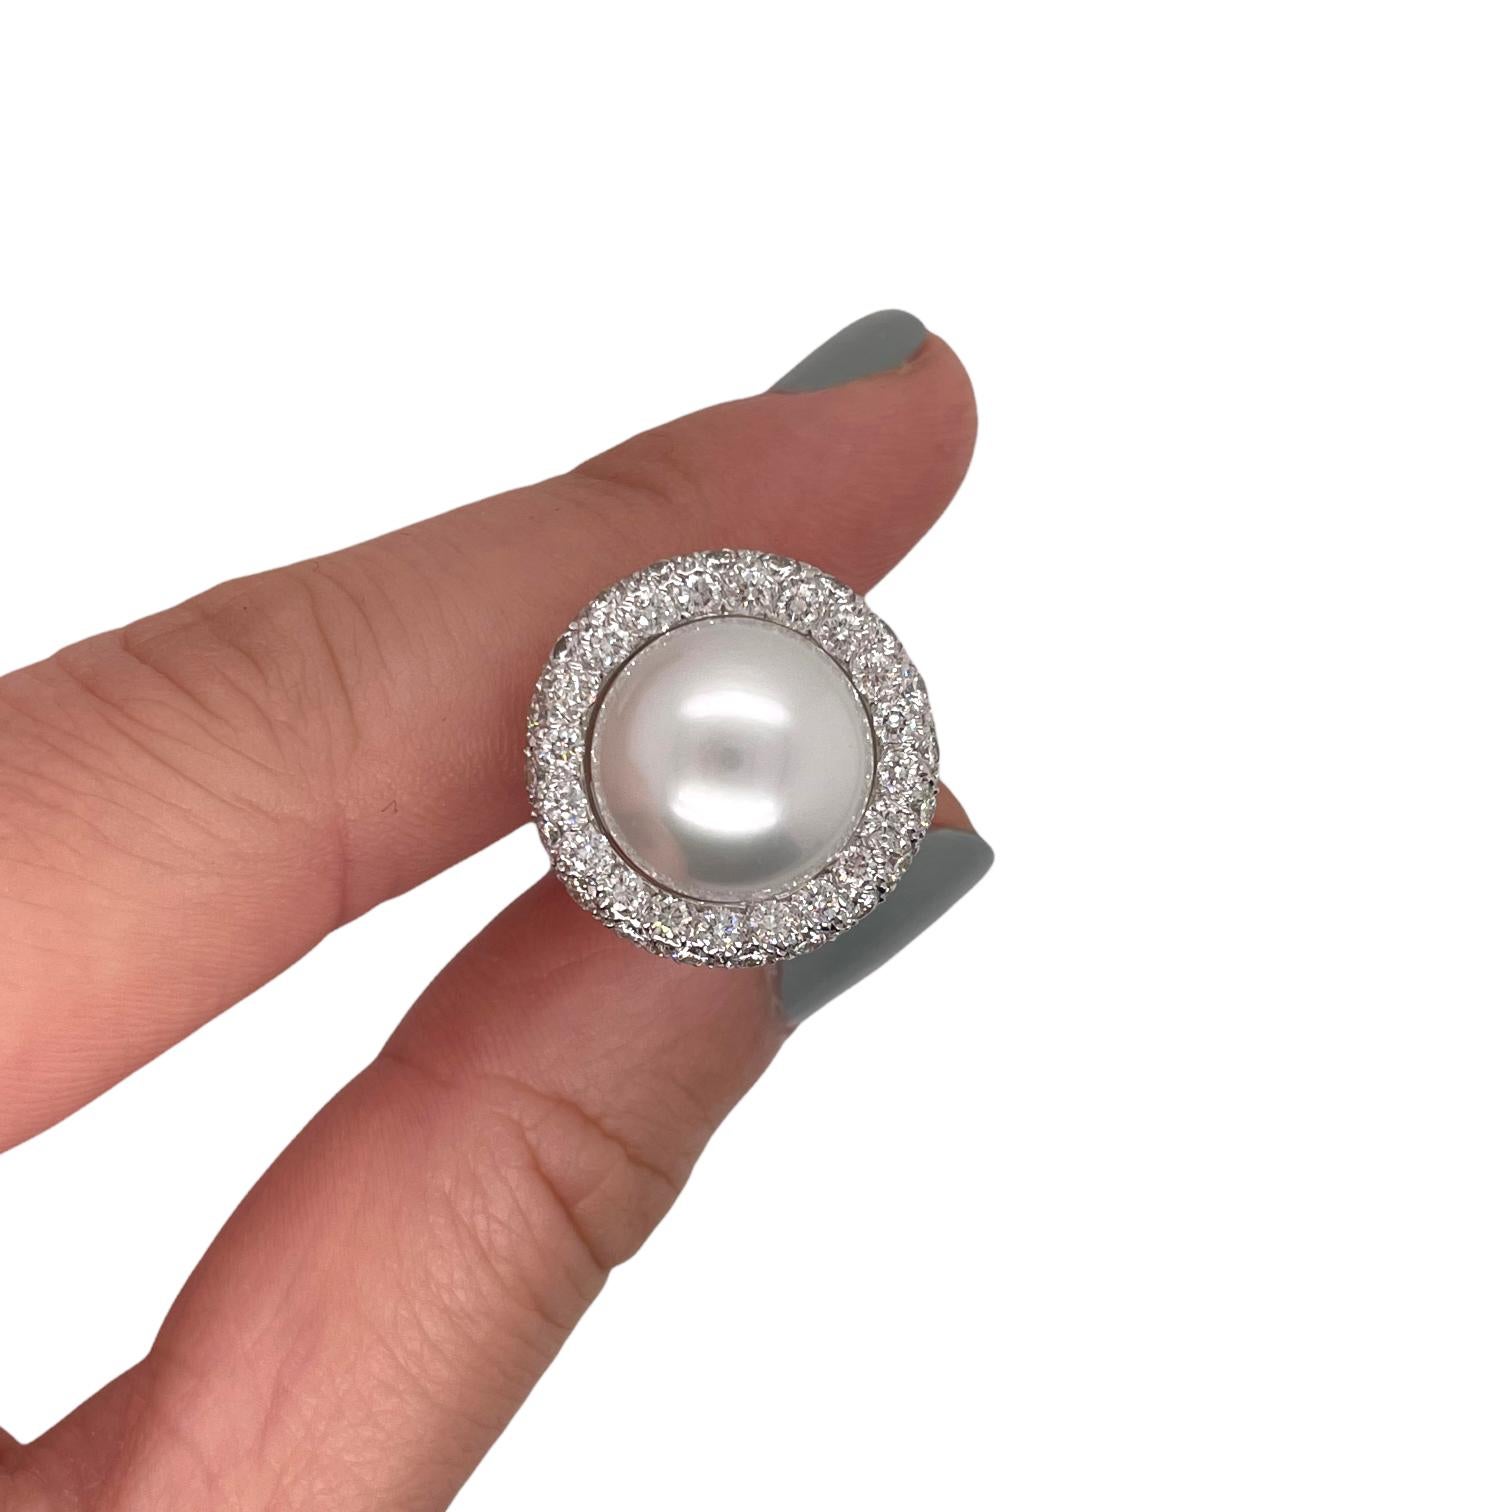 Earrings contain two 12.8mm South Sea Pearls and 120 round brilliant diamonds surrounding within a pave style halo, approximately 3.00tcw. Diamonds are near colorless and SI1 in clarity, excellent cut.  Earrings have a French clip post closure, all